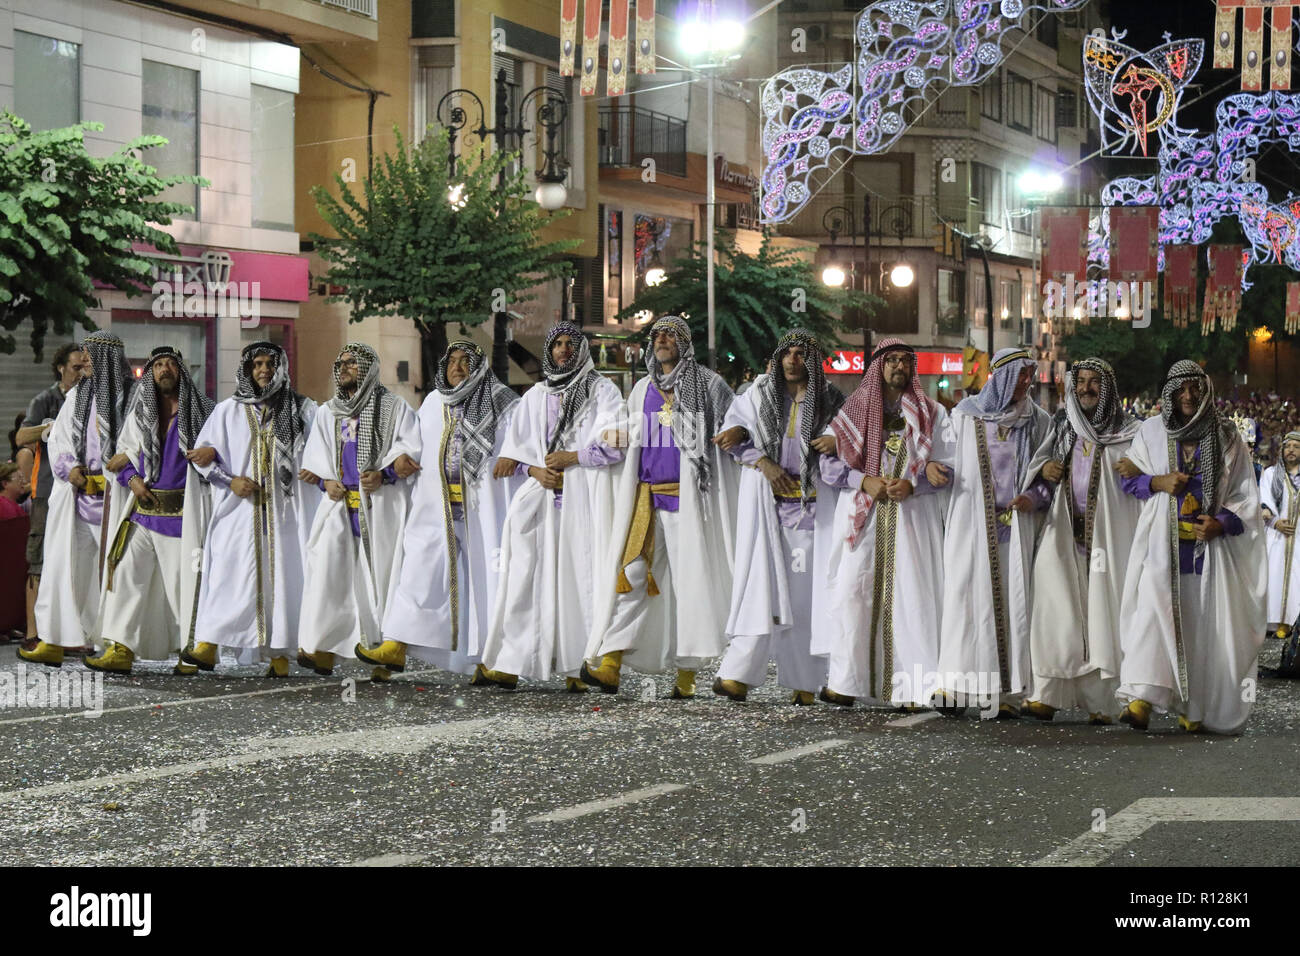 The Moros Almohabenos company on a street parade during the Moors and Christians (Moros y Cristianos) historical reenactment in Orihuela, Spain Stock Photo